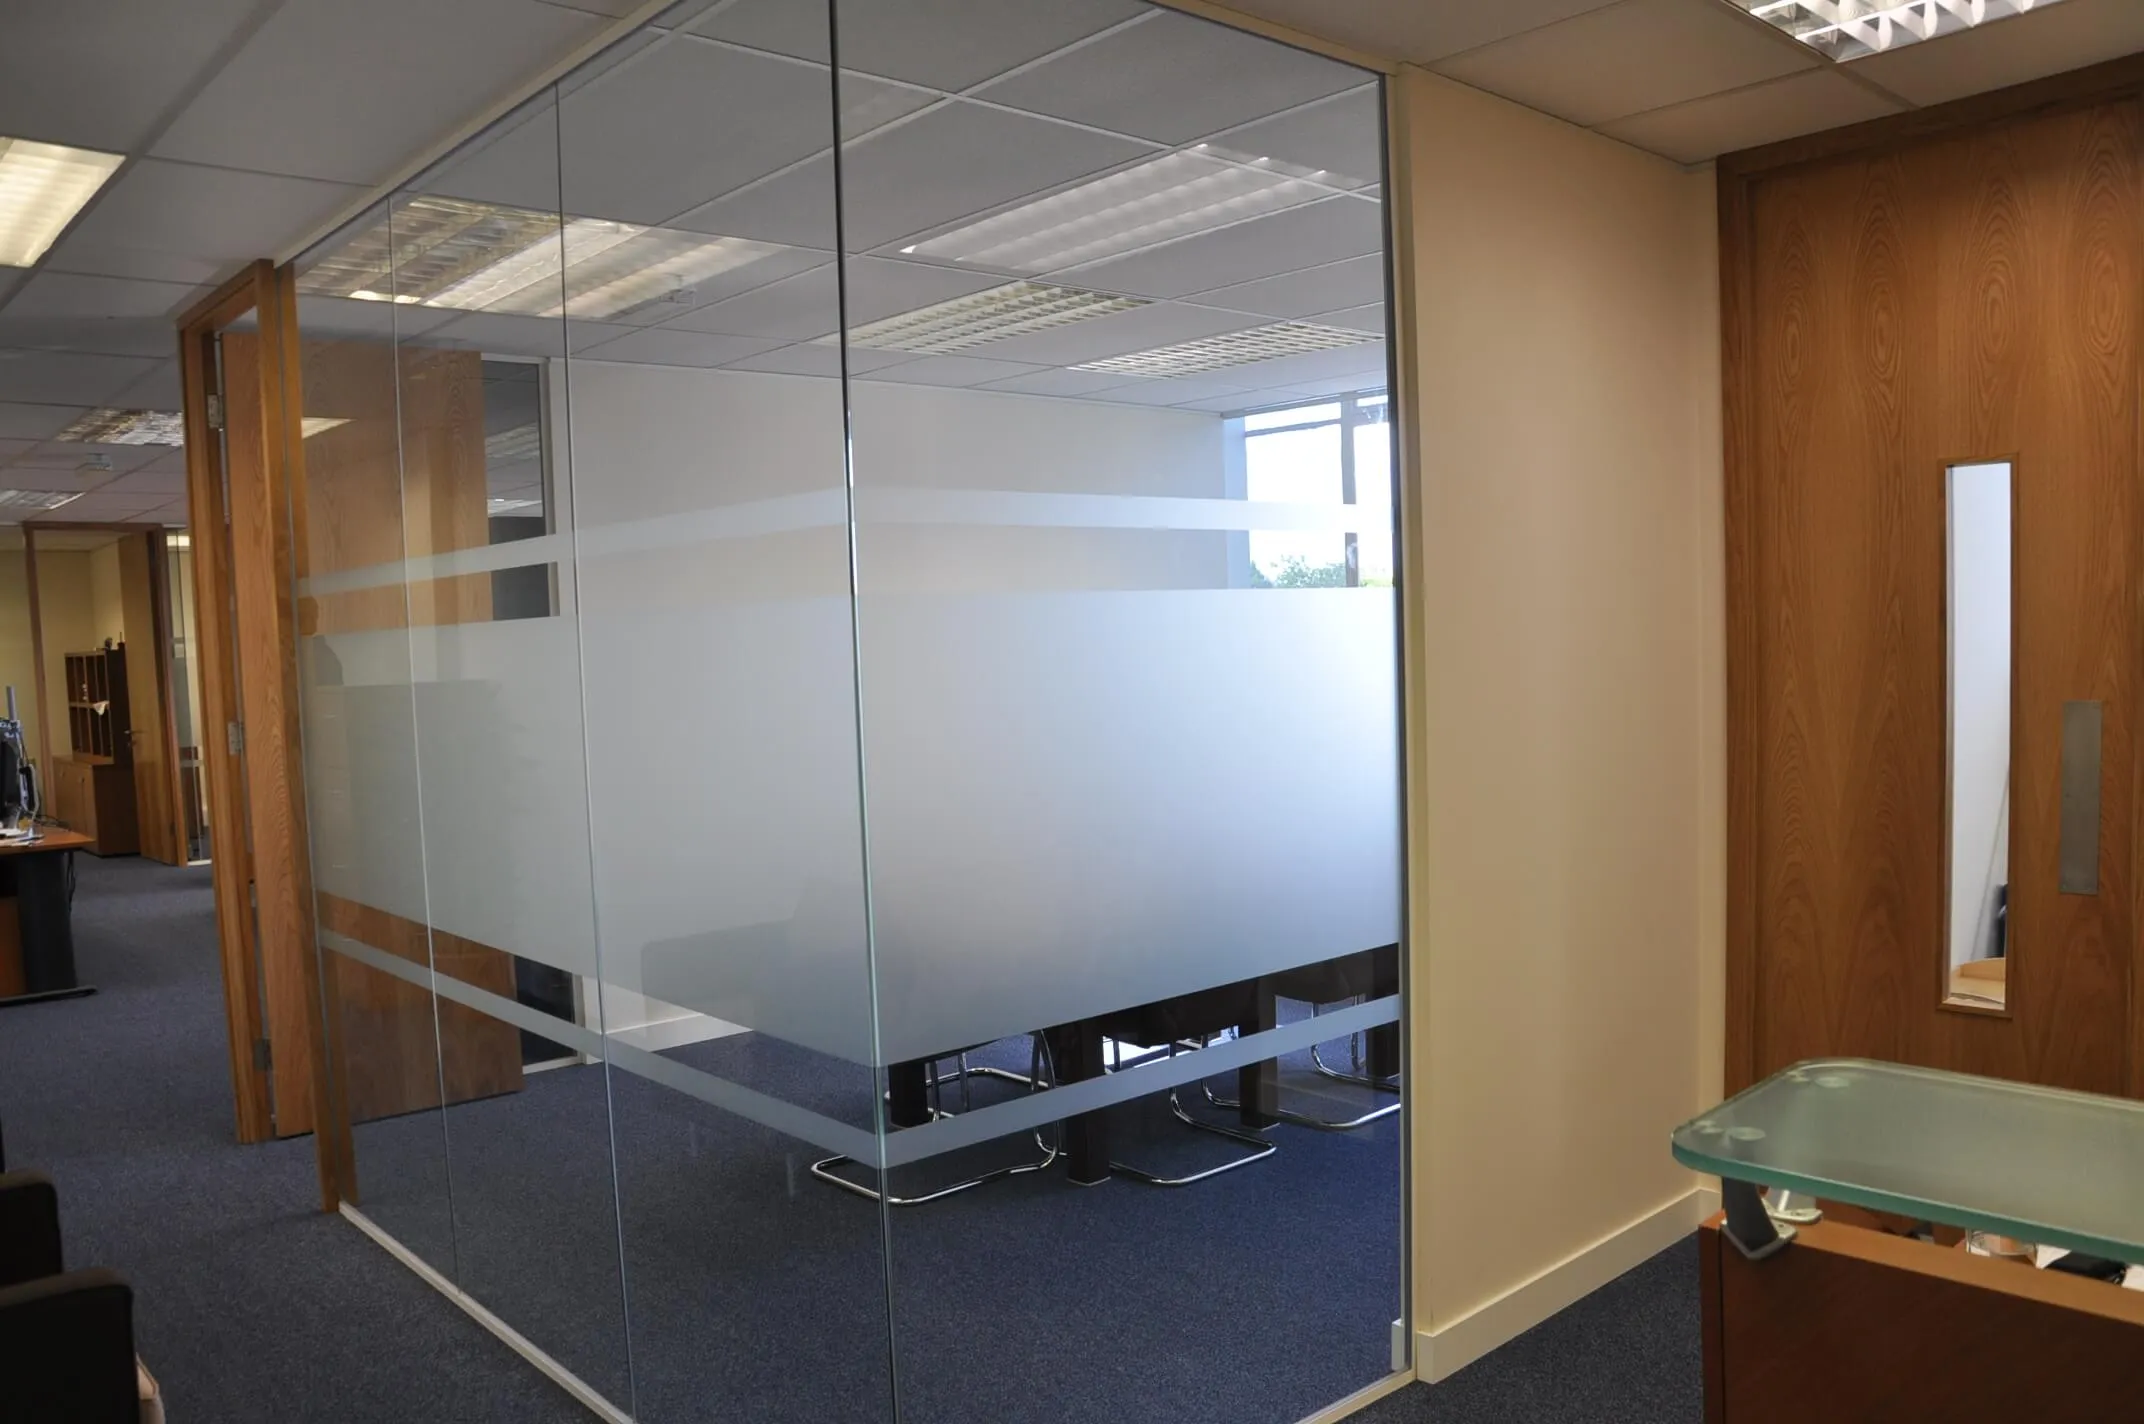 Office meeting area space with glass partitions with manifestation